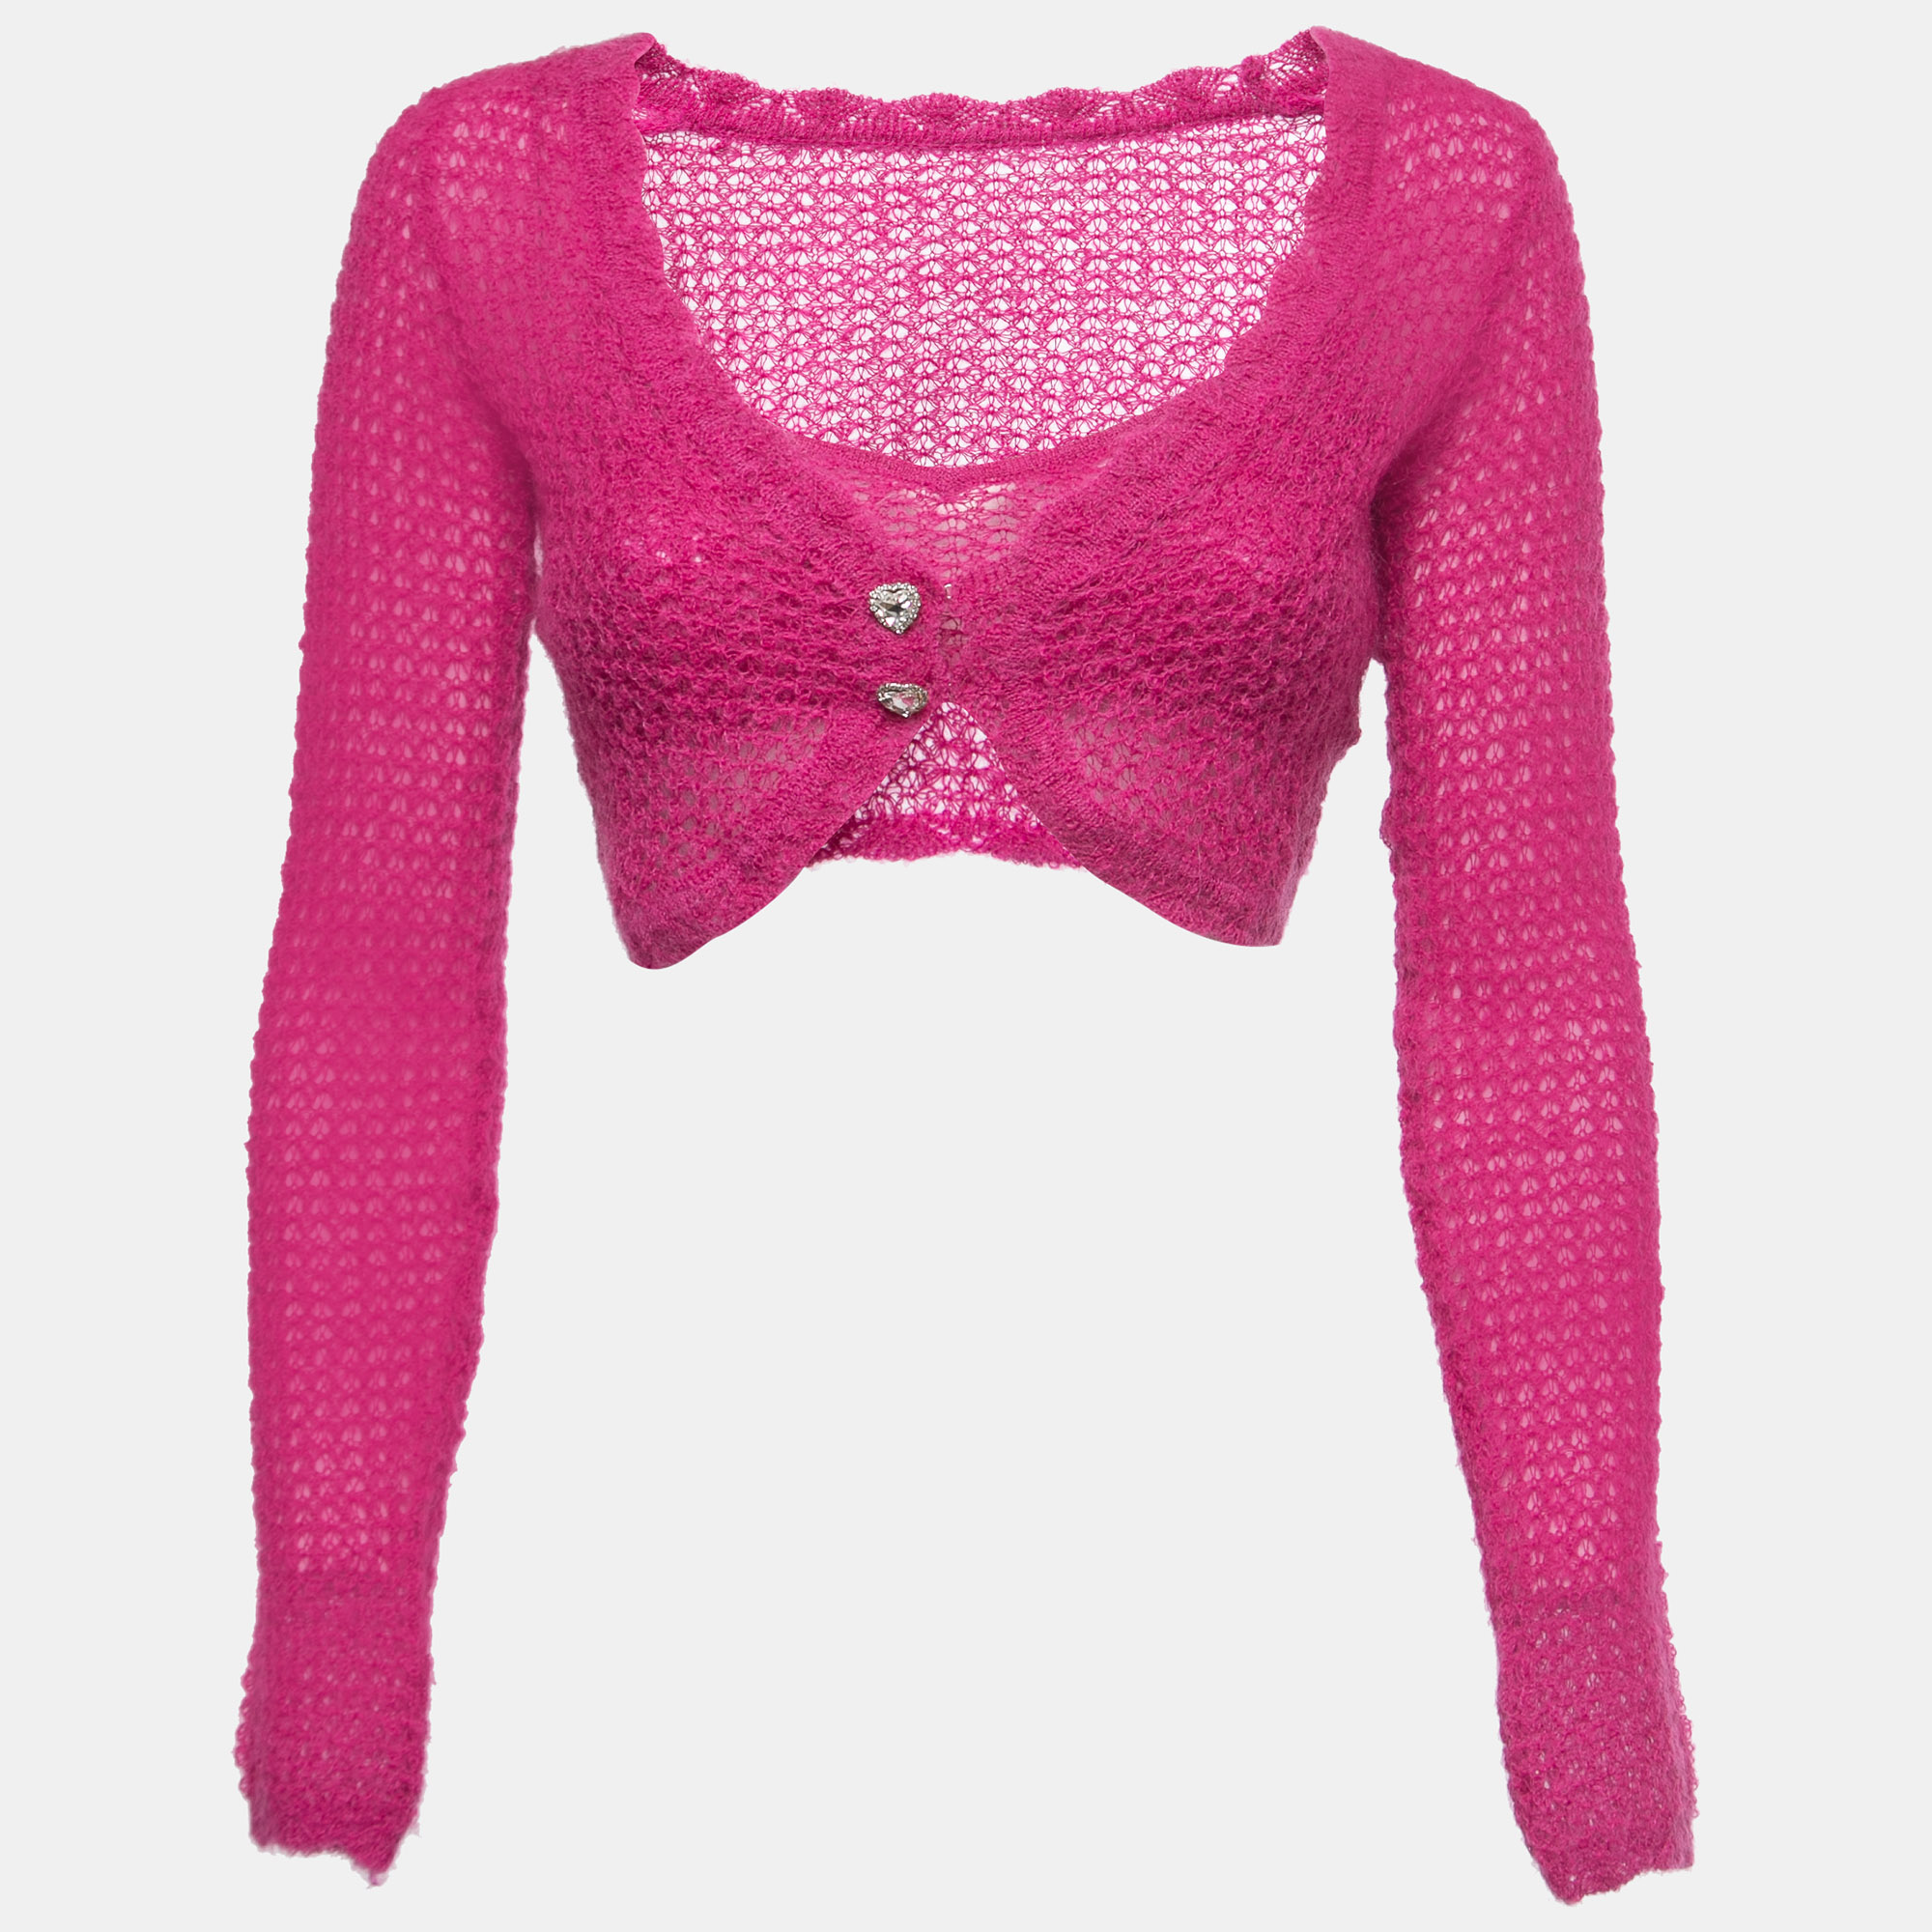 

Nana Jacqueline Hot Pink Crochet Knit Cropped Top and Cardigan Set